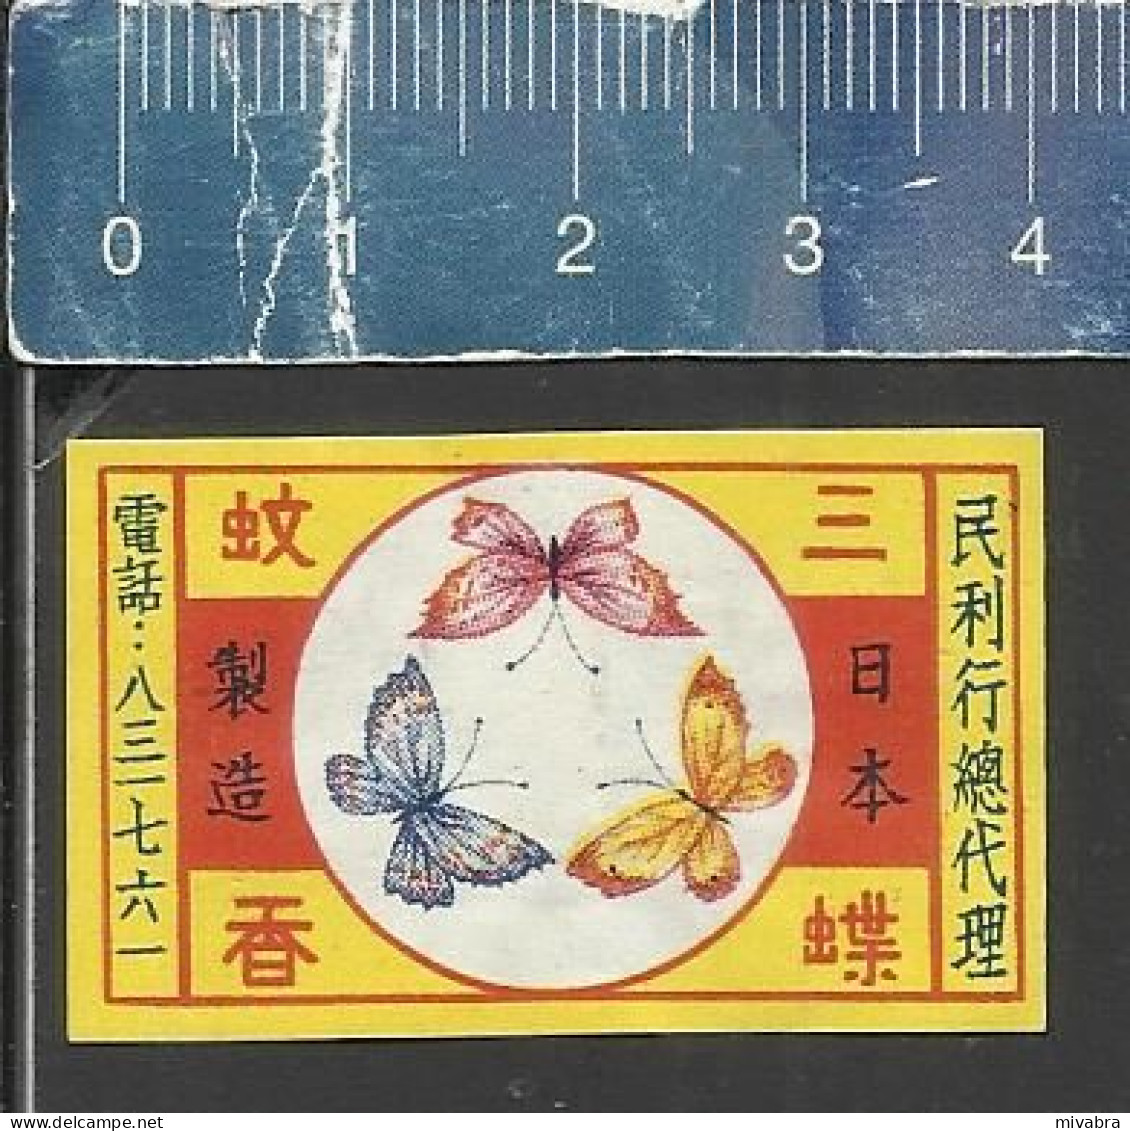 BUTTERFLIES ( BUTTERFLY VLINDERS PAPILLONS ) OLD VINTAGE SMALL MATCHBOX LABEL MADE IN CHINA - Cajas De Cerillas - Etiquetas